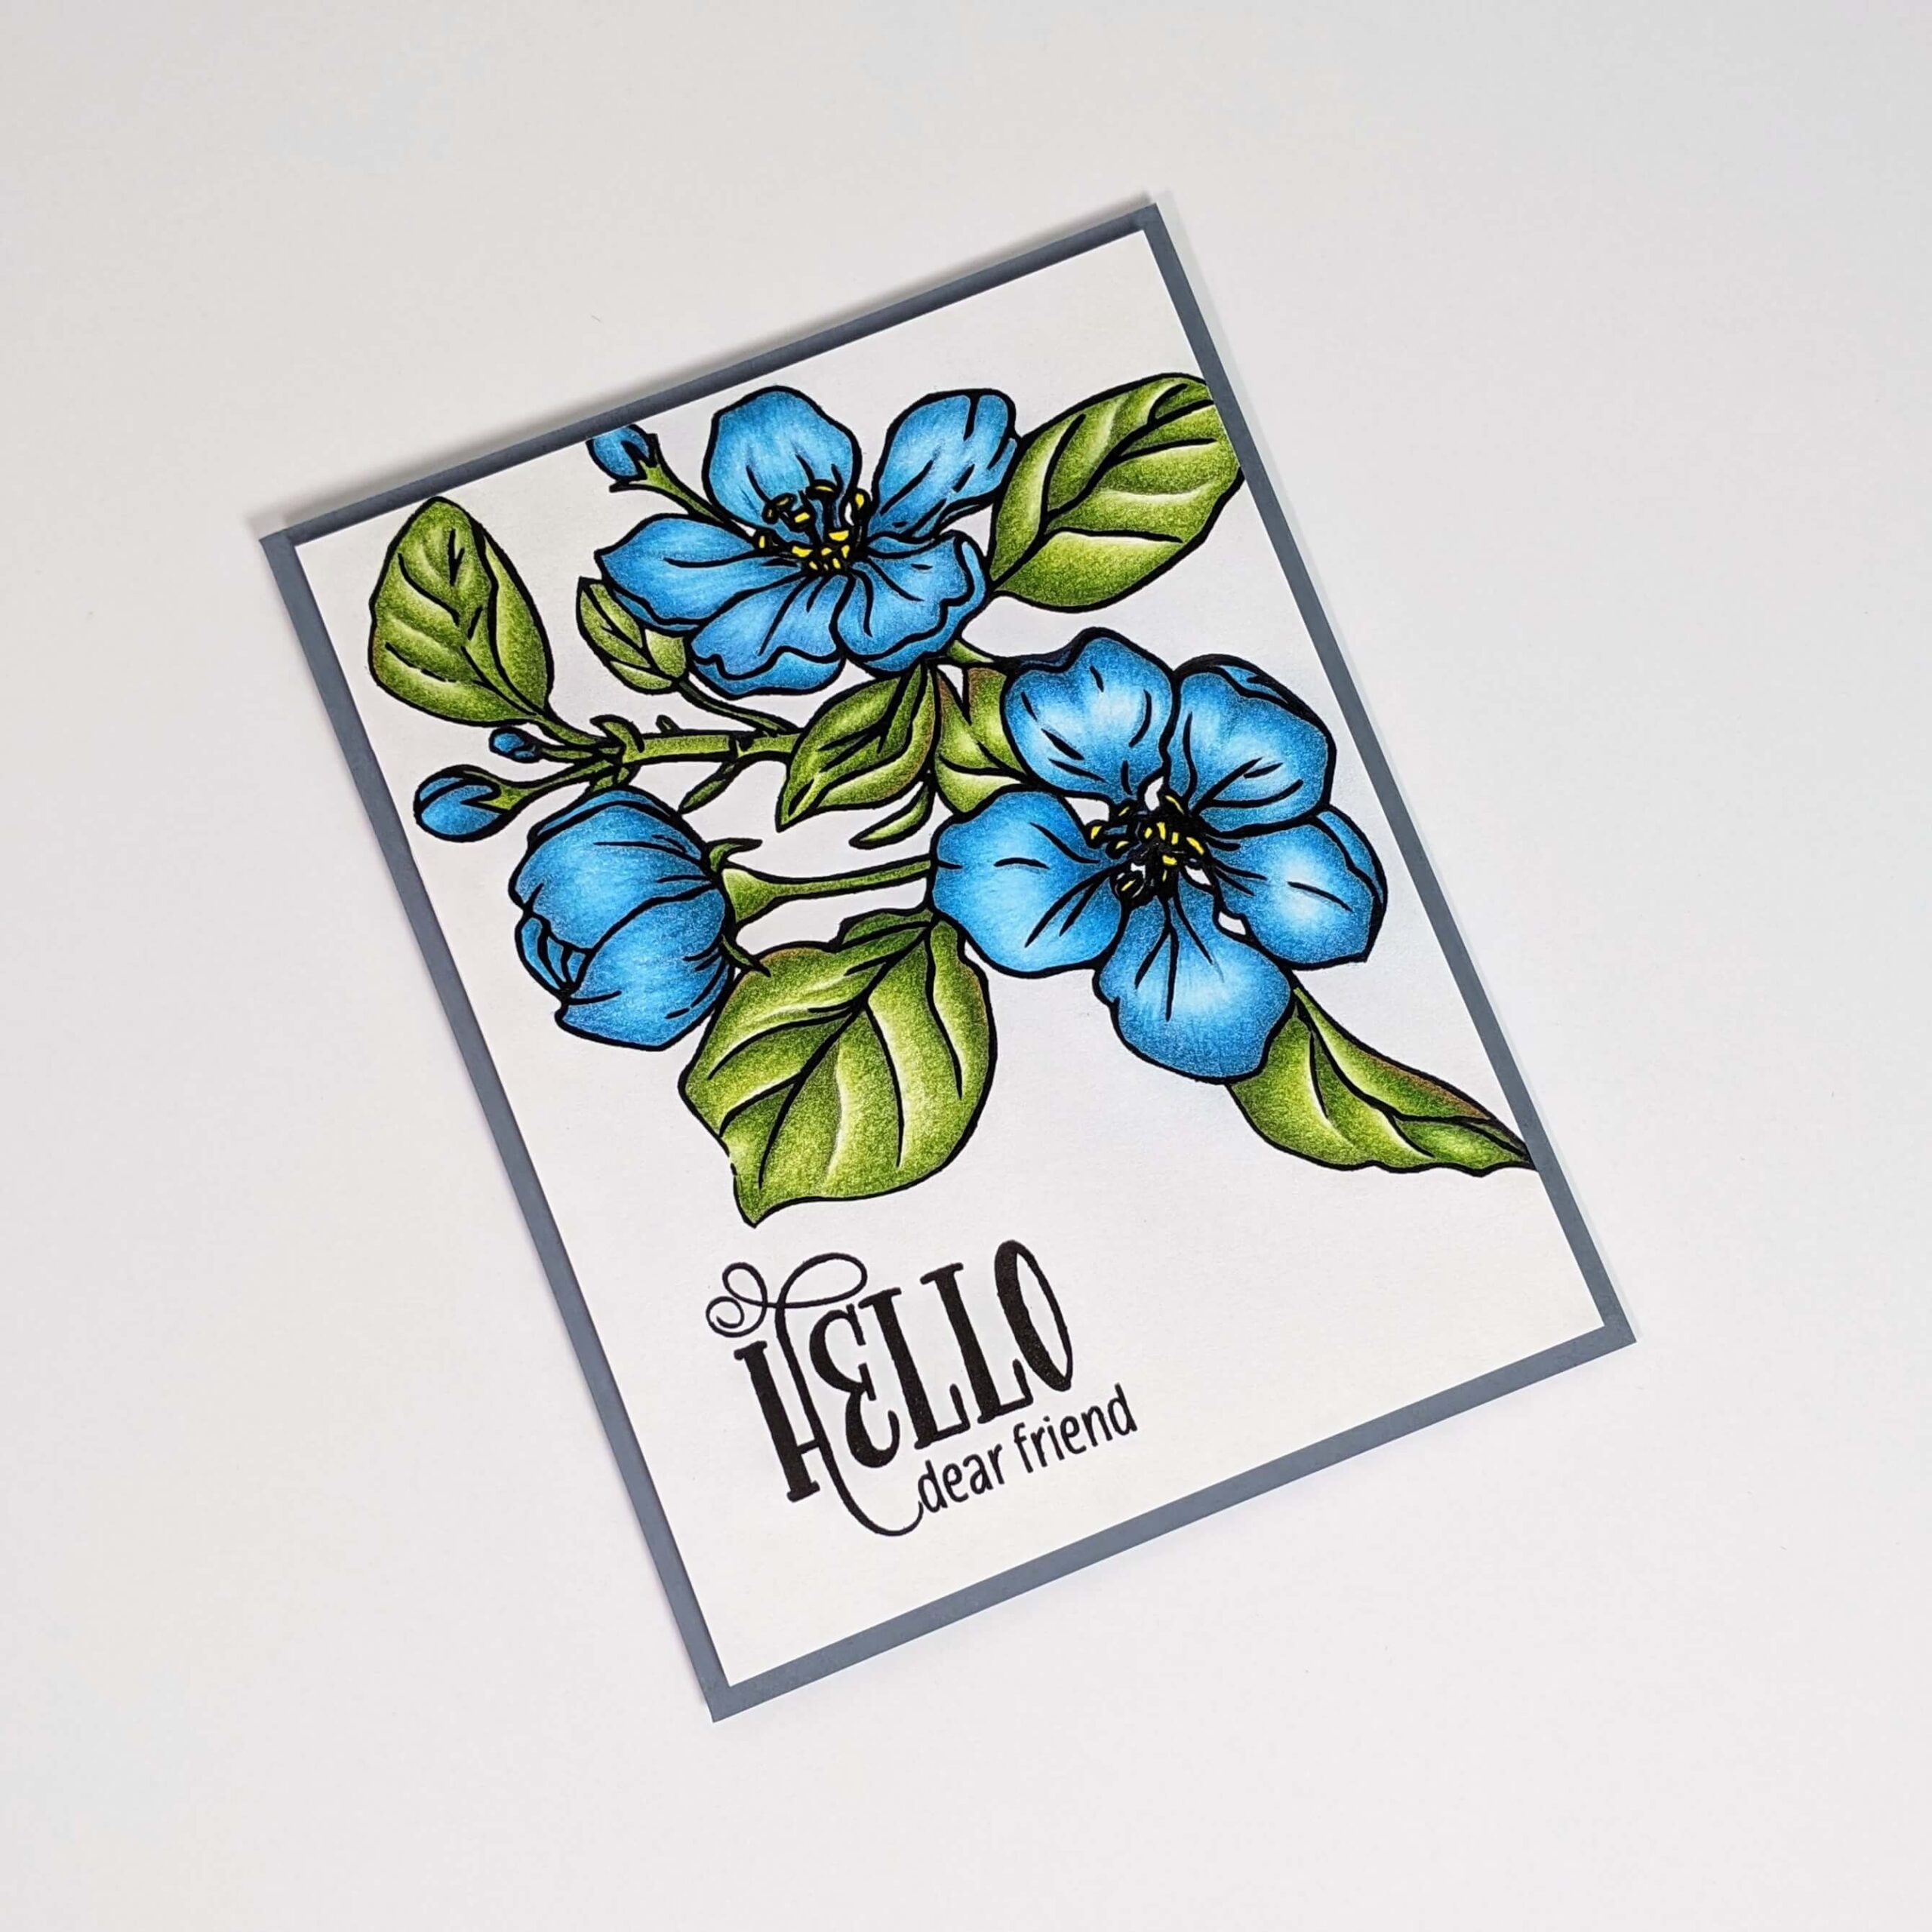 Colored Pencil Blending for Beginners | Floral Friendship Card